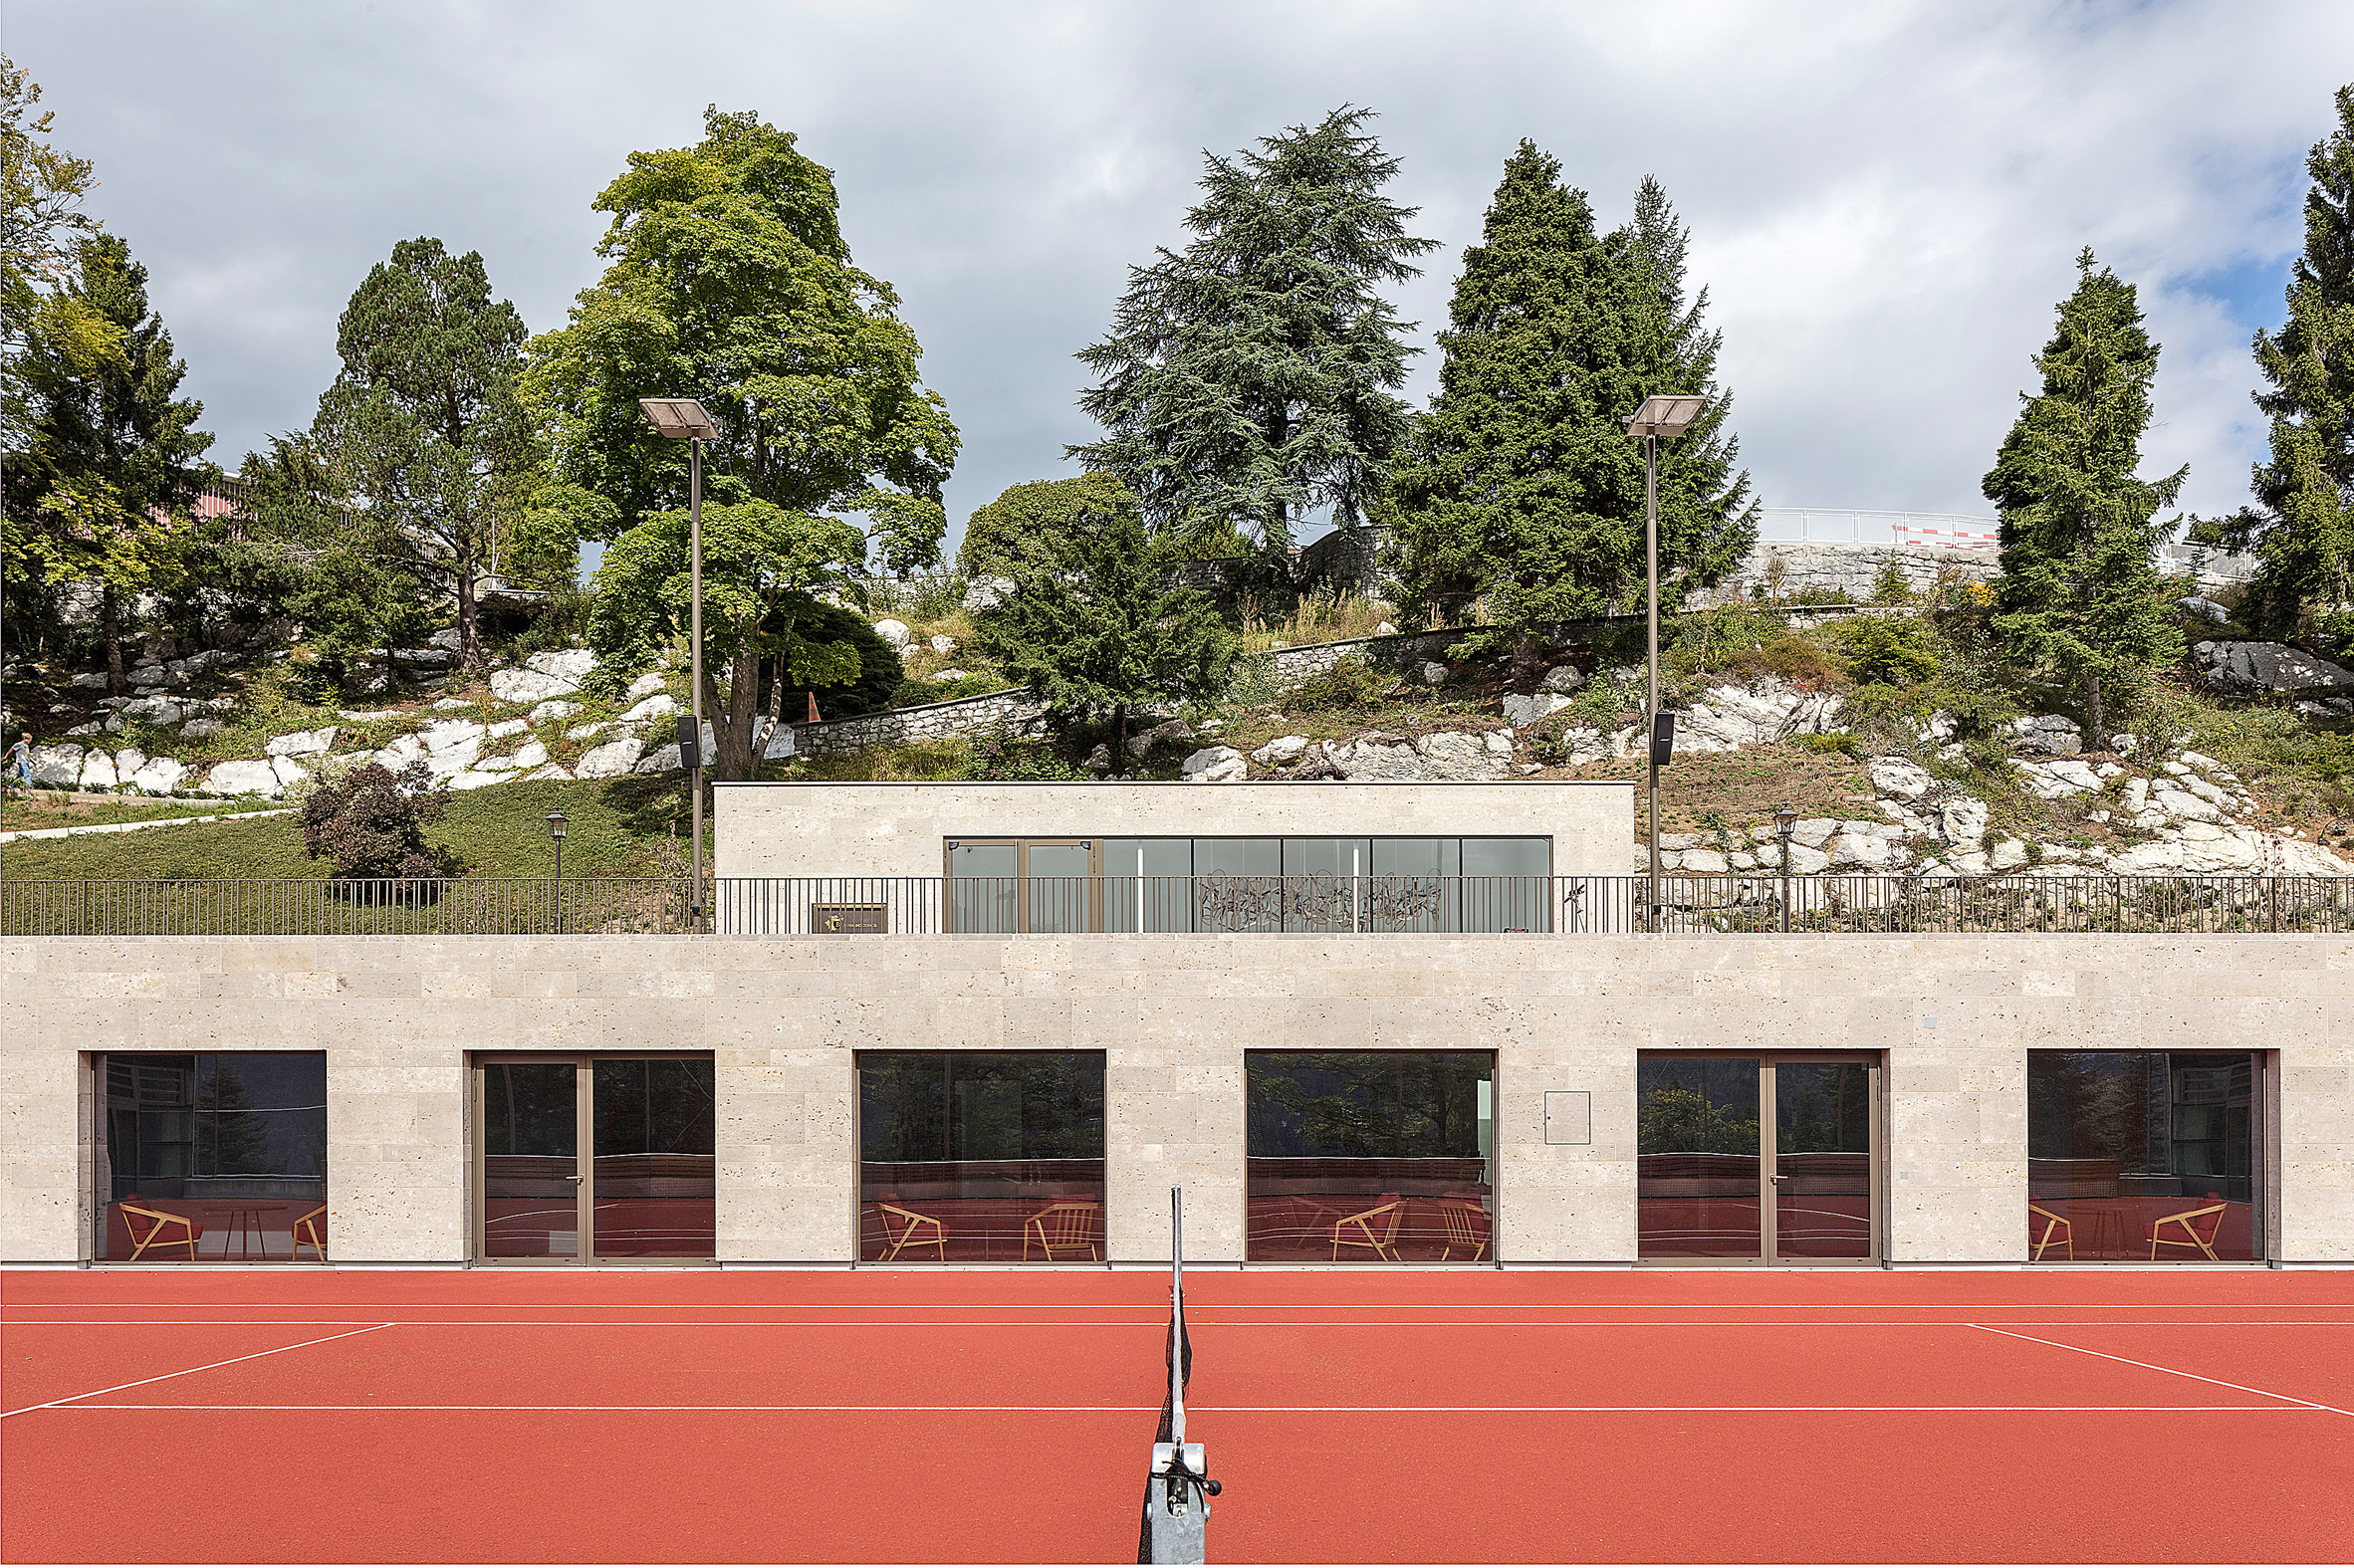 Club house of Diamond Domes tennis courts designed by Rüssli Architekten with CLT roofs by Neue Holzbau in the Swiss Alps